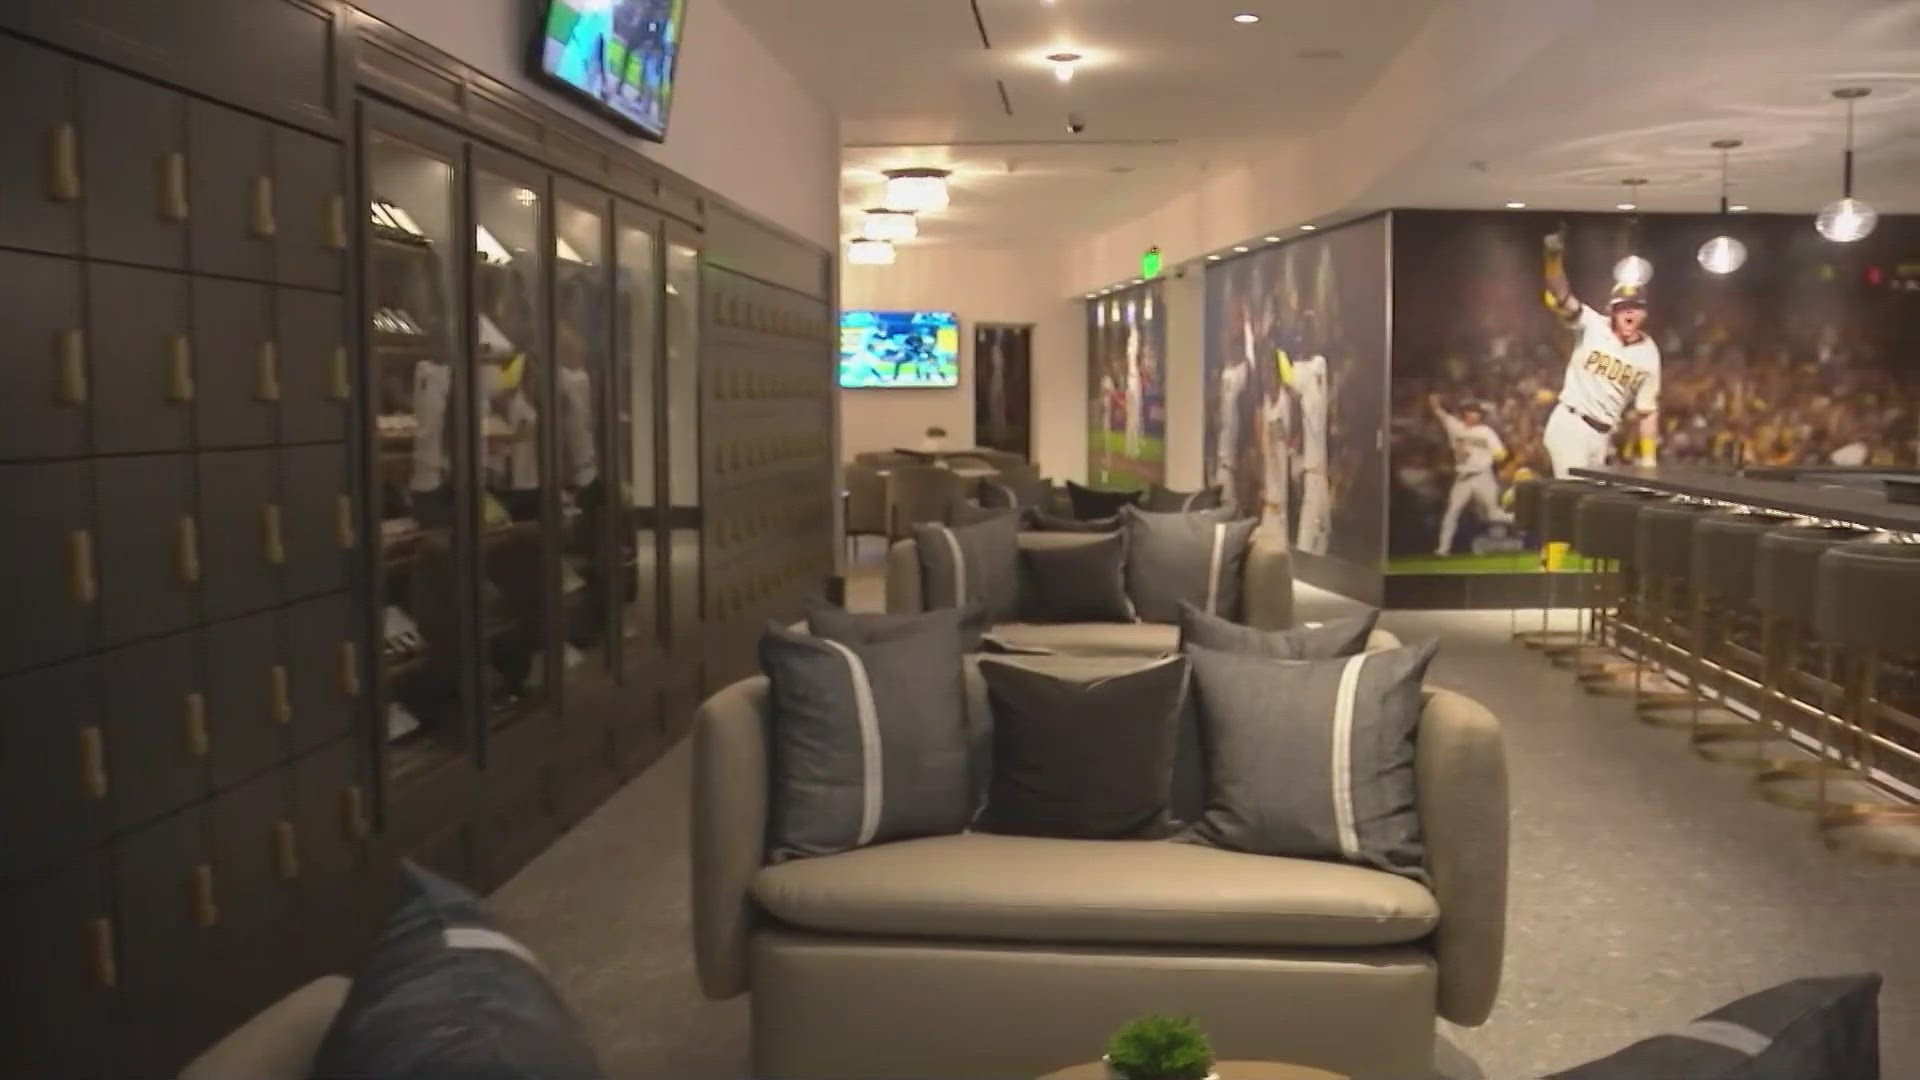 Curt Waugh with the San Diego Padres gave CBS 8 a behind the scenes look at the Home Plate Club and talked about some of the perks of watching the game from there.